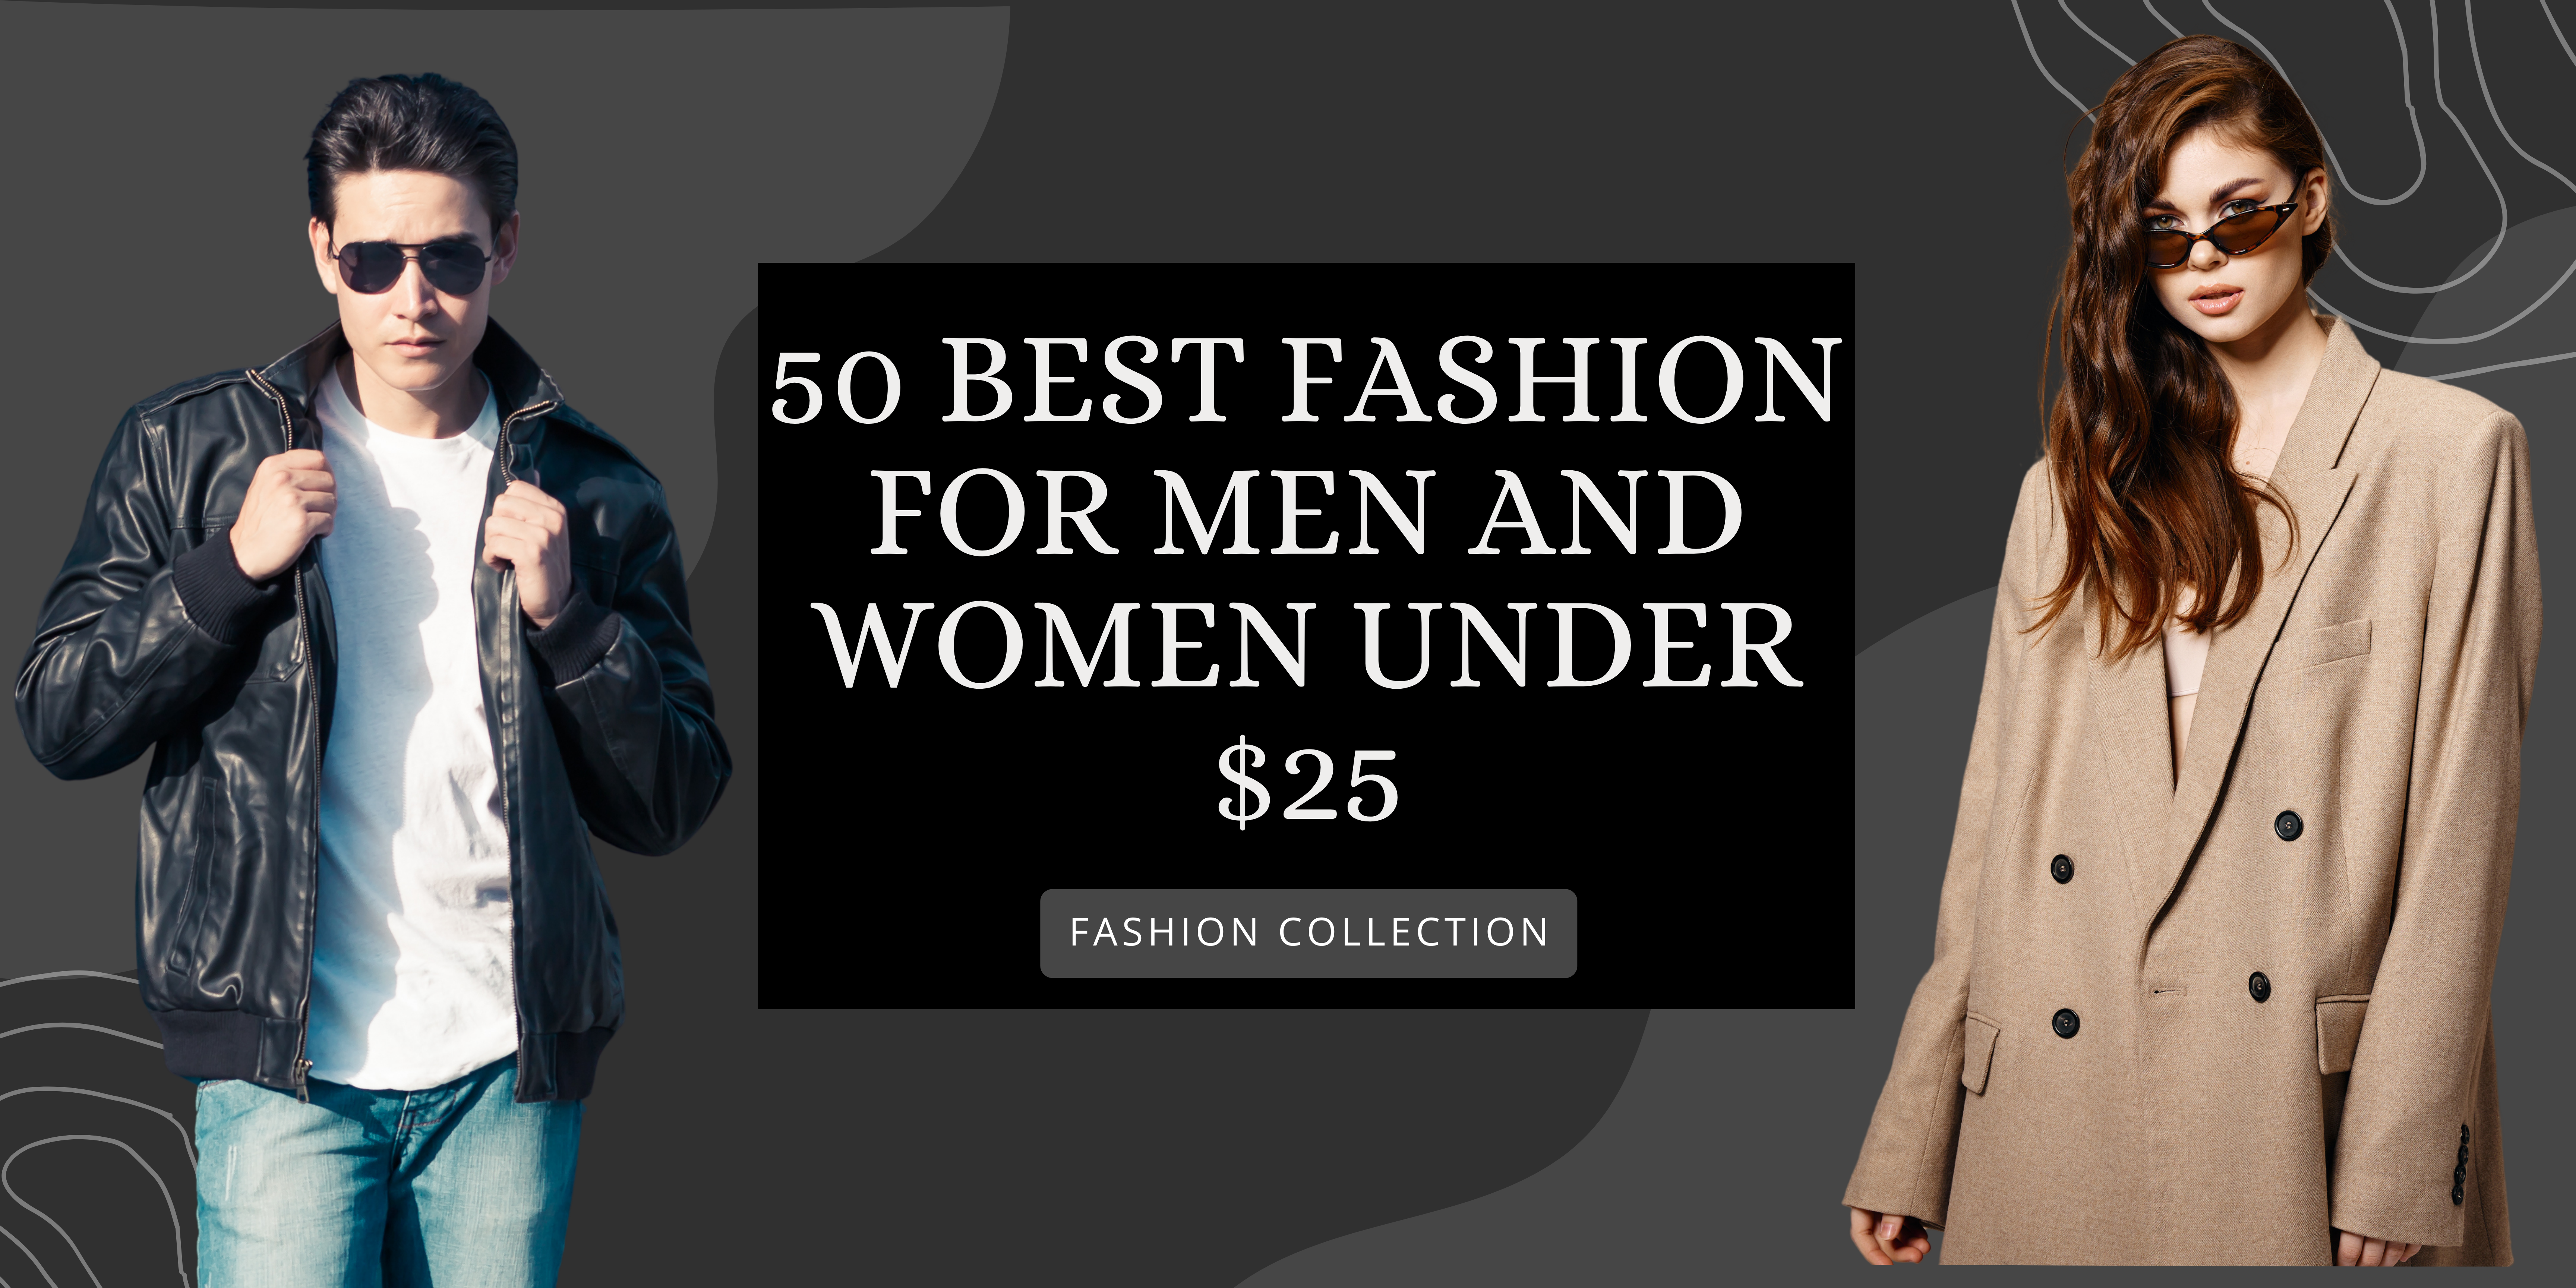 50 Best Fashion for Men and Women Under $25